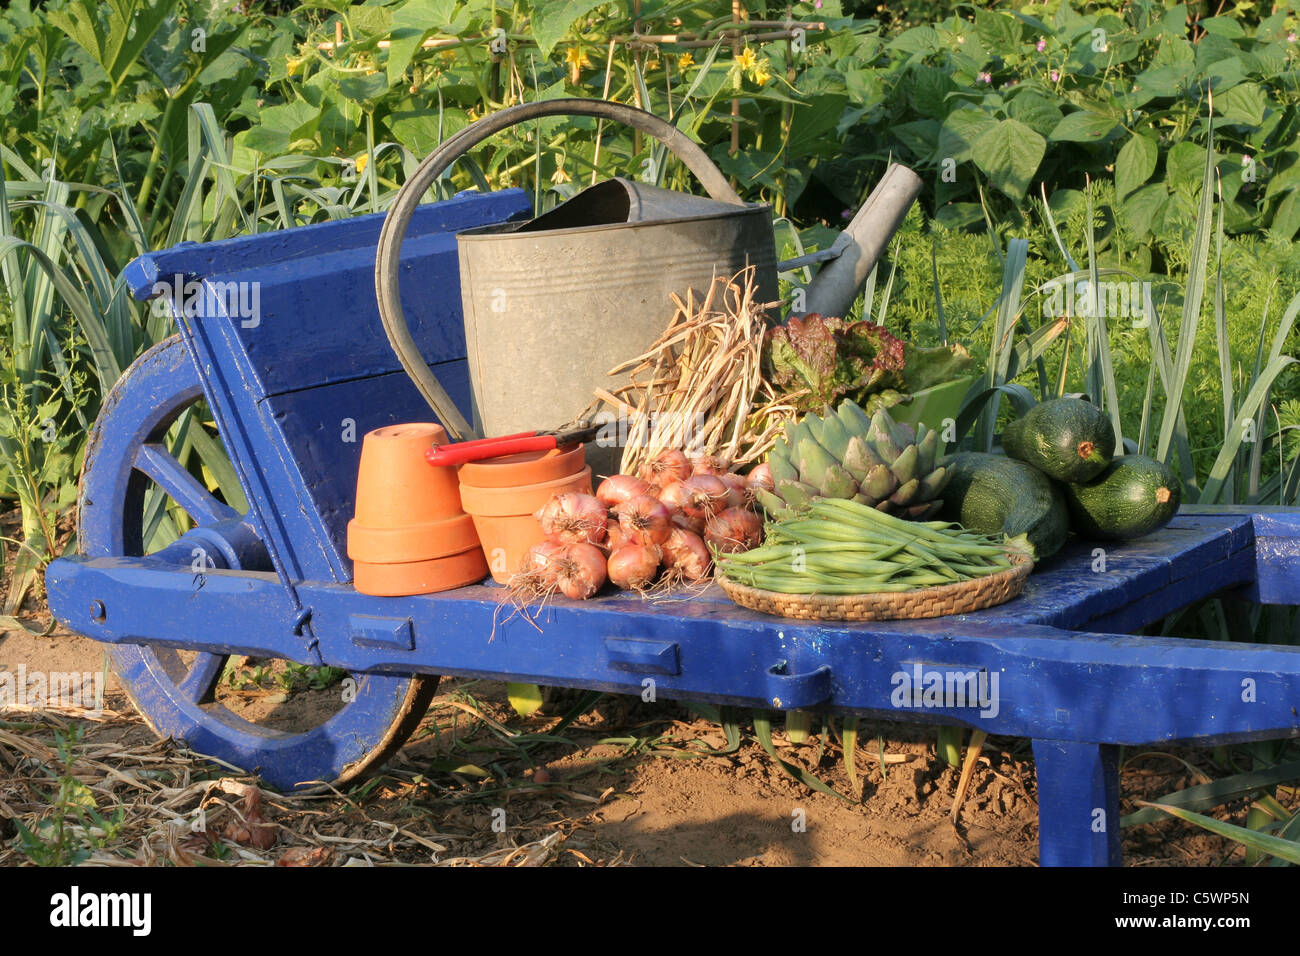 Vegetables from the garden on the wheelbarrow : green beans, shallots, artichoke, squashes, lettuce. Stock Photo